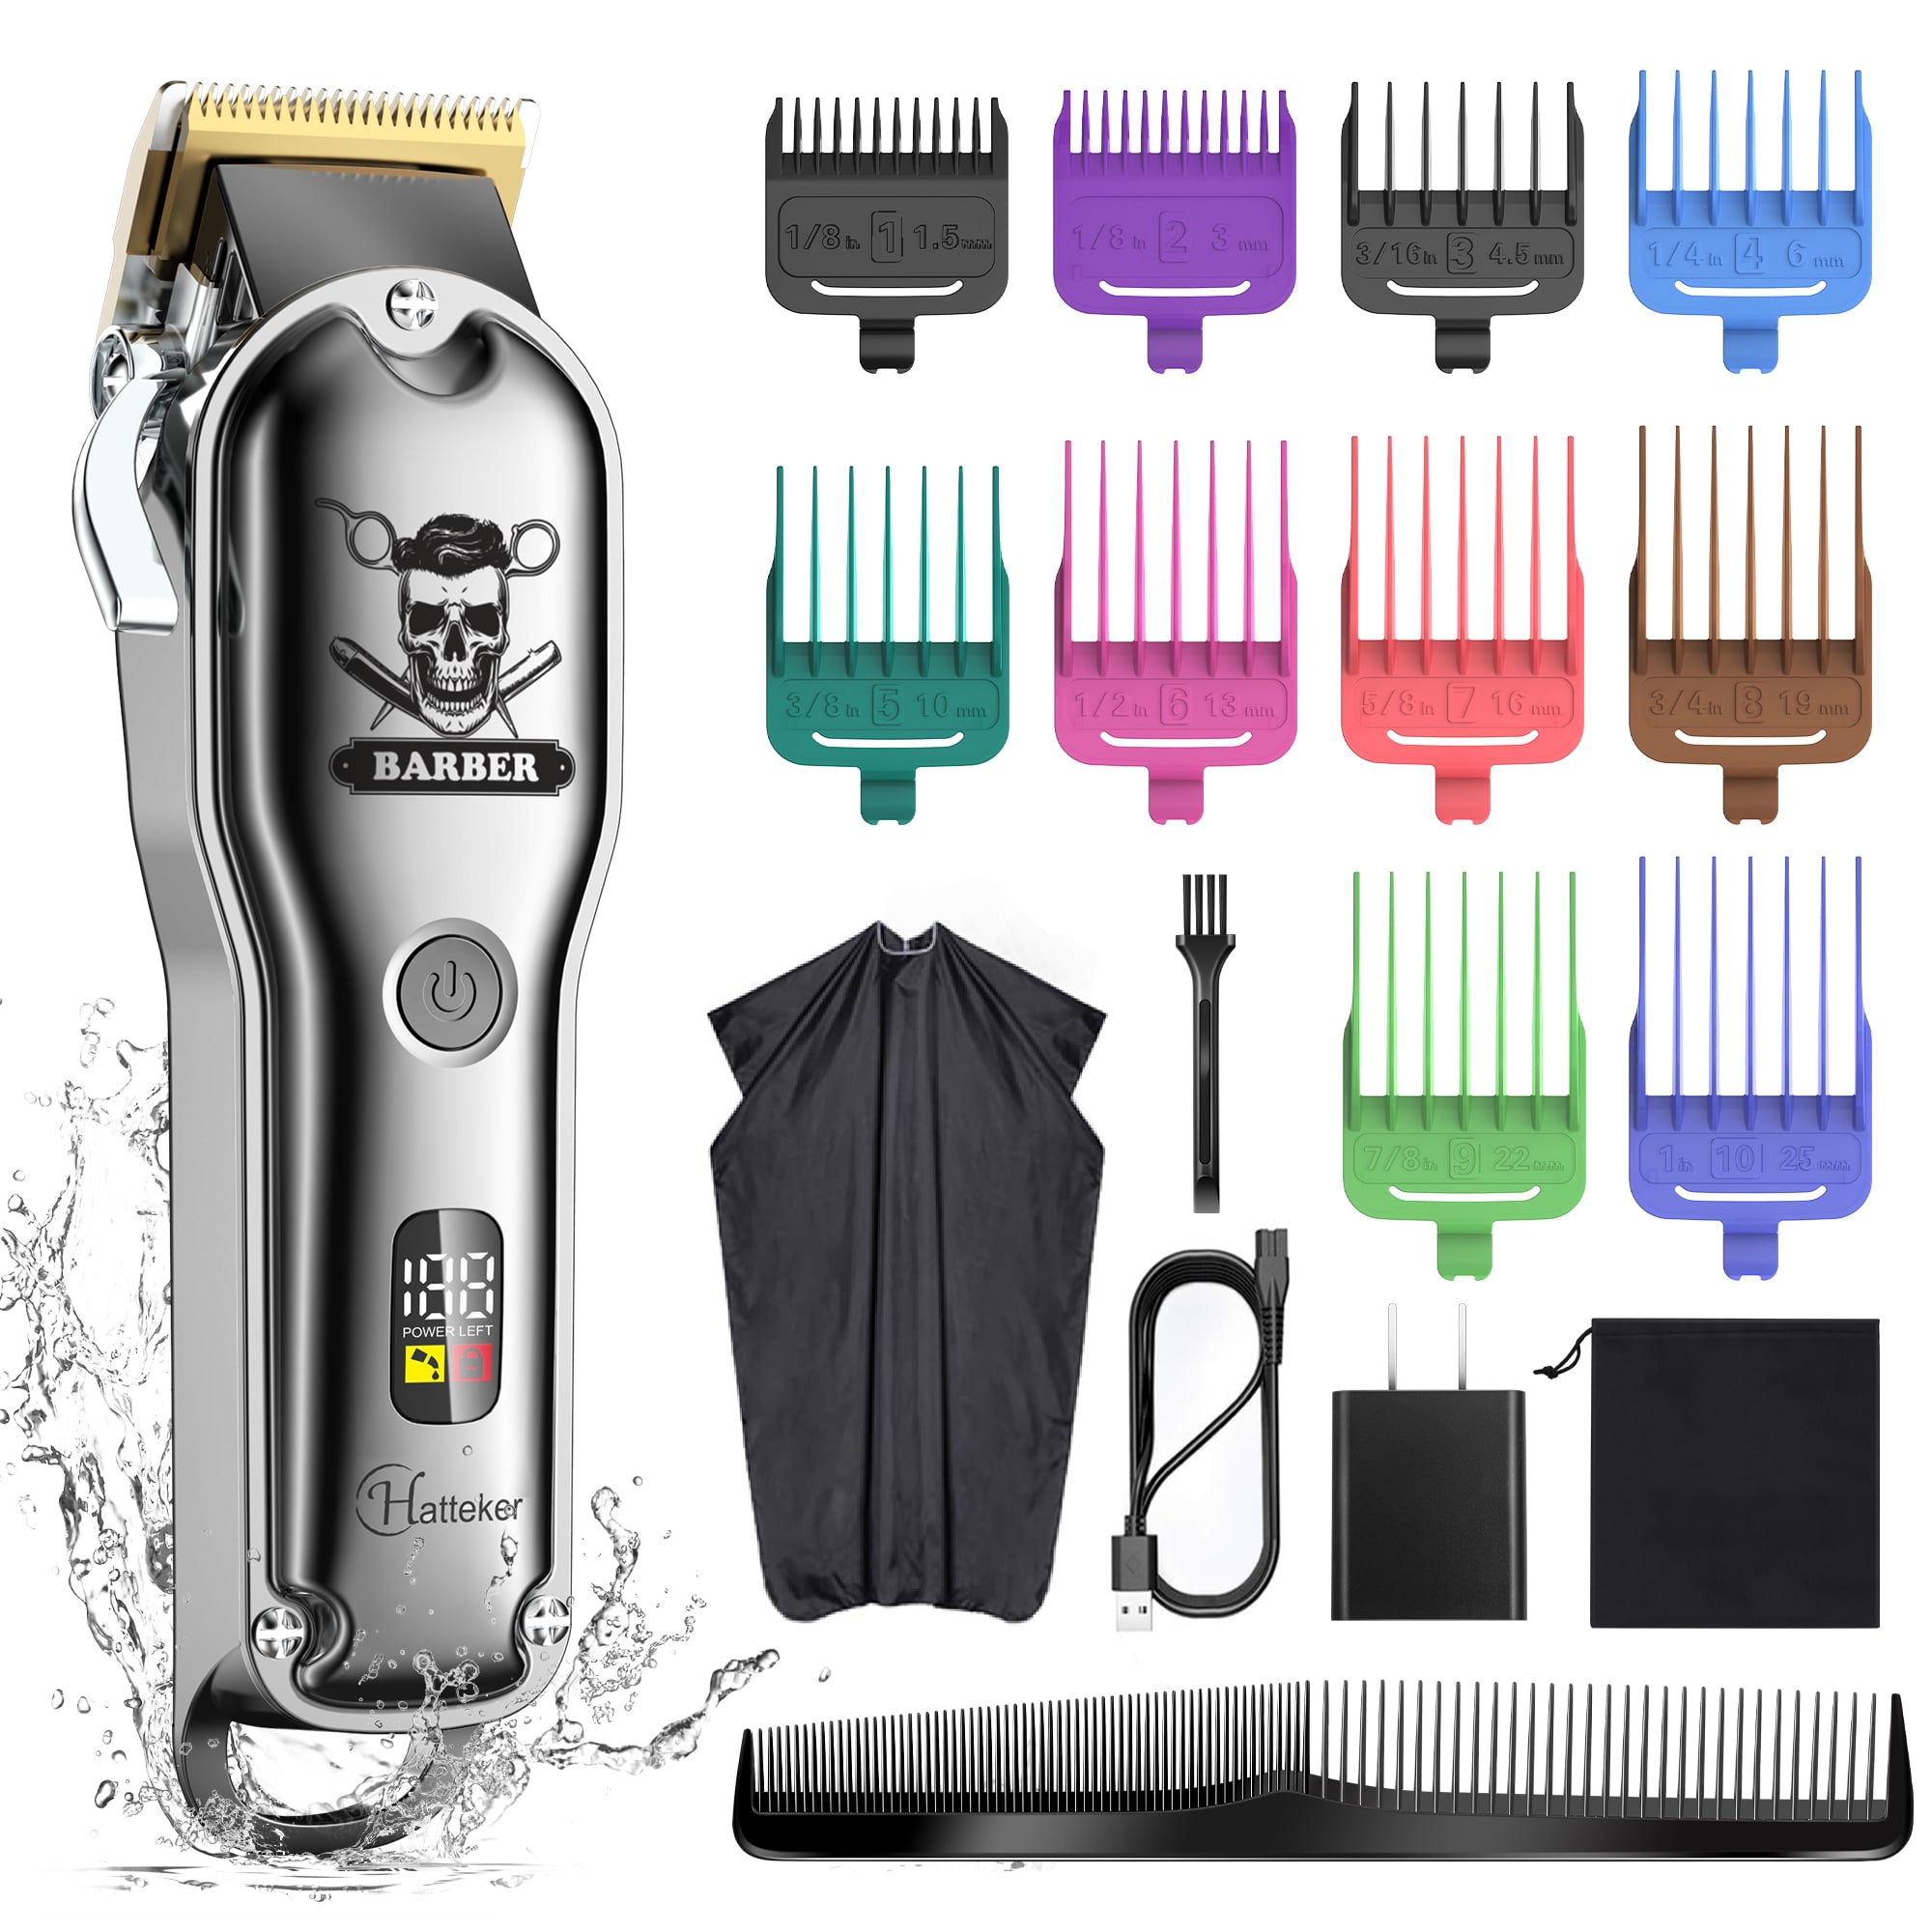 Hatteker Hair Kit Pro Hair Clippers for Men Professional Barber Clippers IPX7 Waterproof Cordless Hair Trimmer Barber Cape - Walmart.com